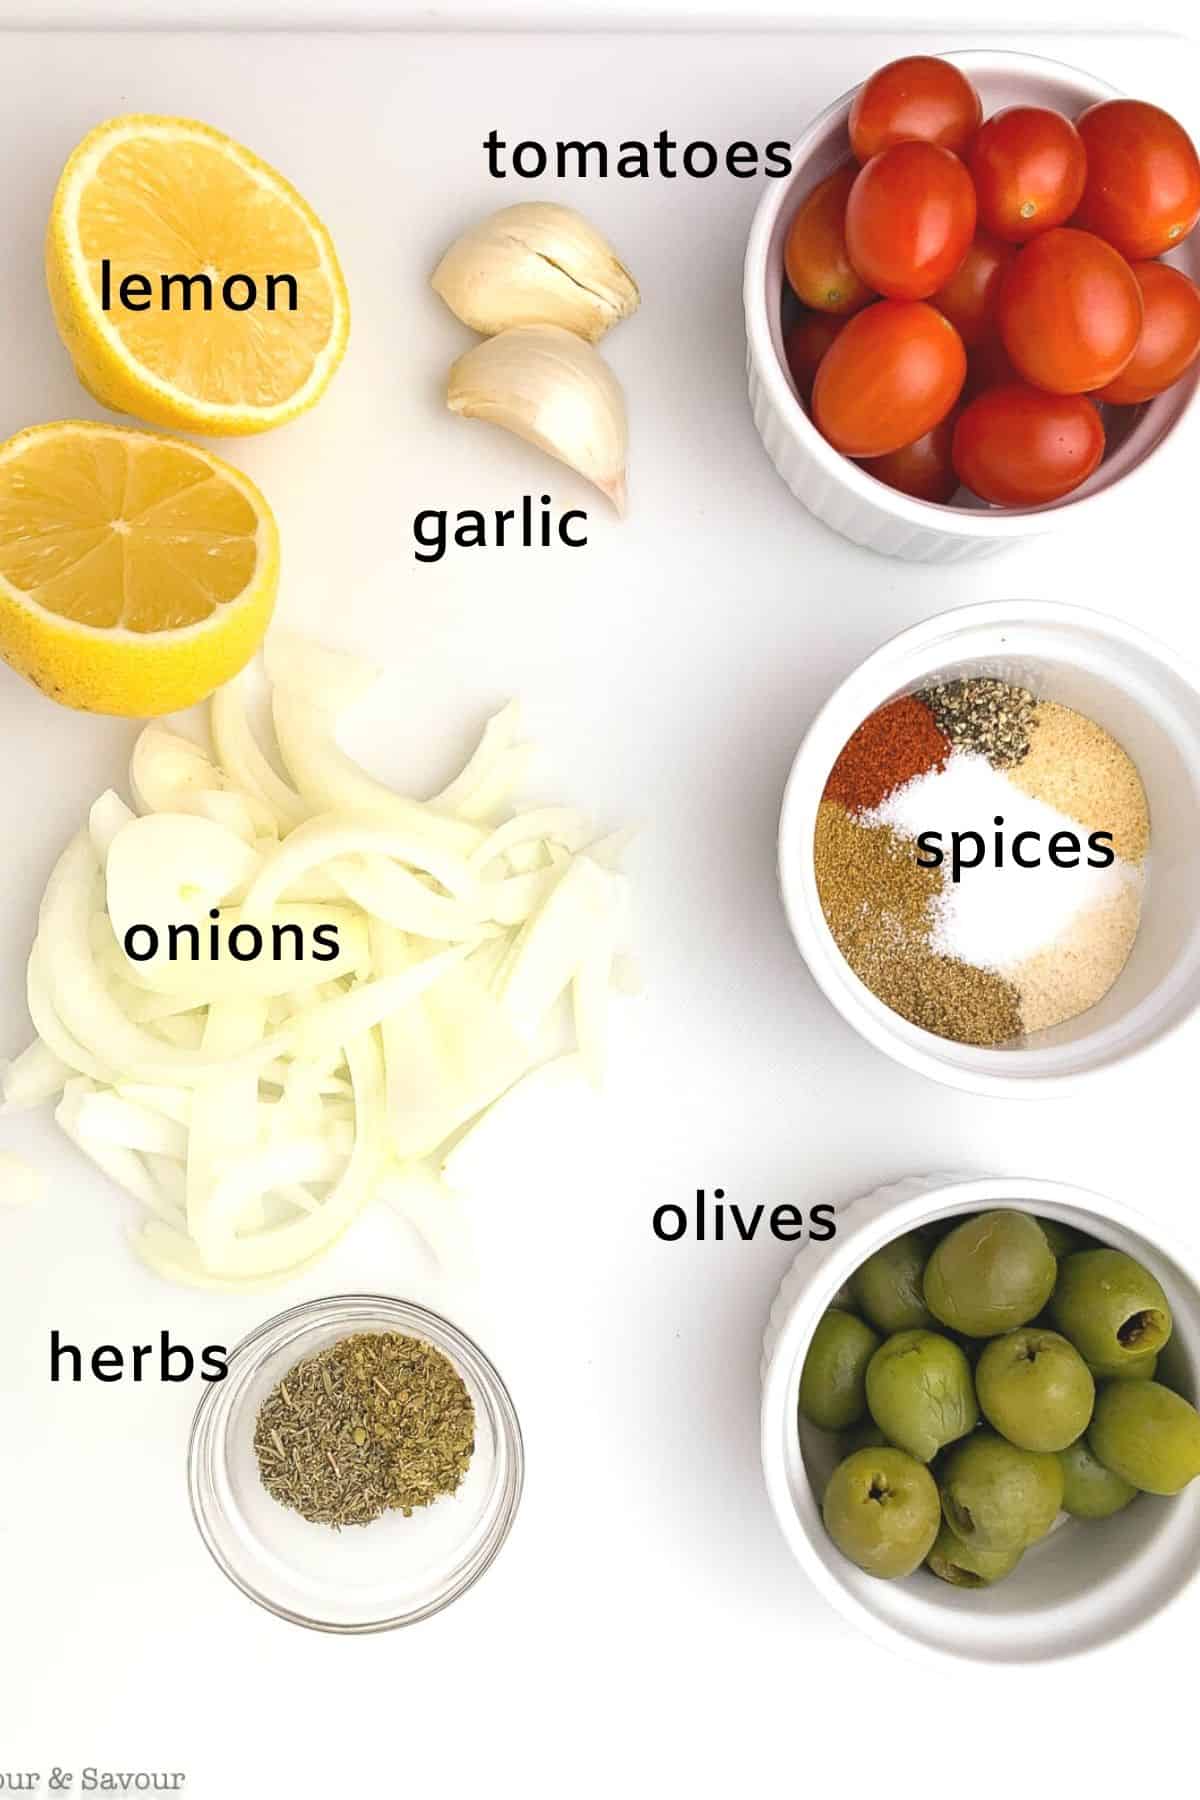 Labelled ingredients for Moroccan Lemon Chicken Thighs.